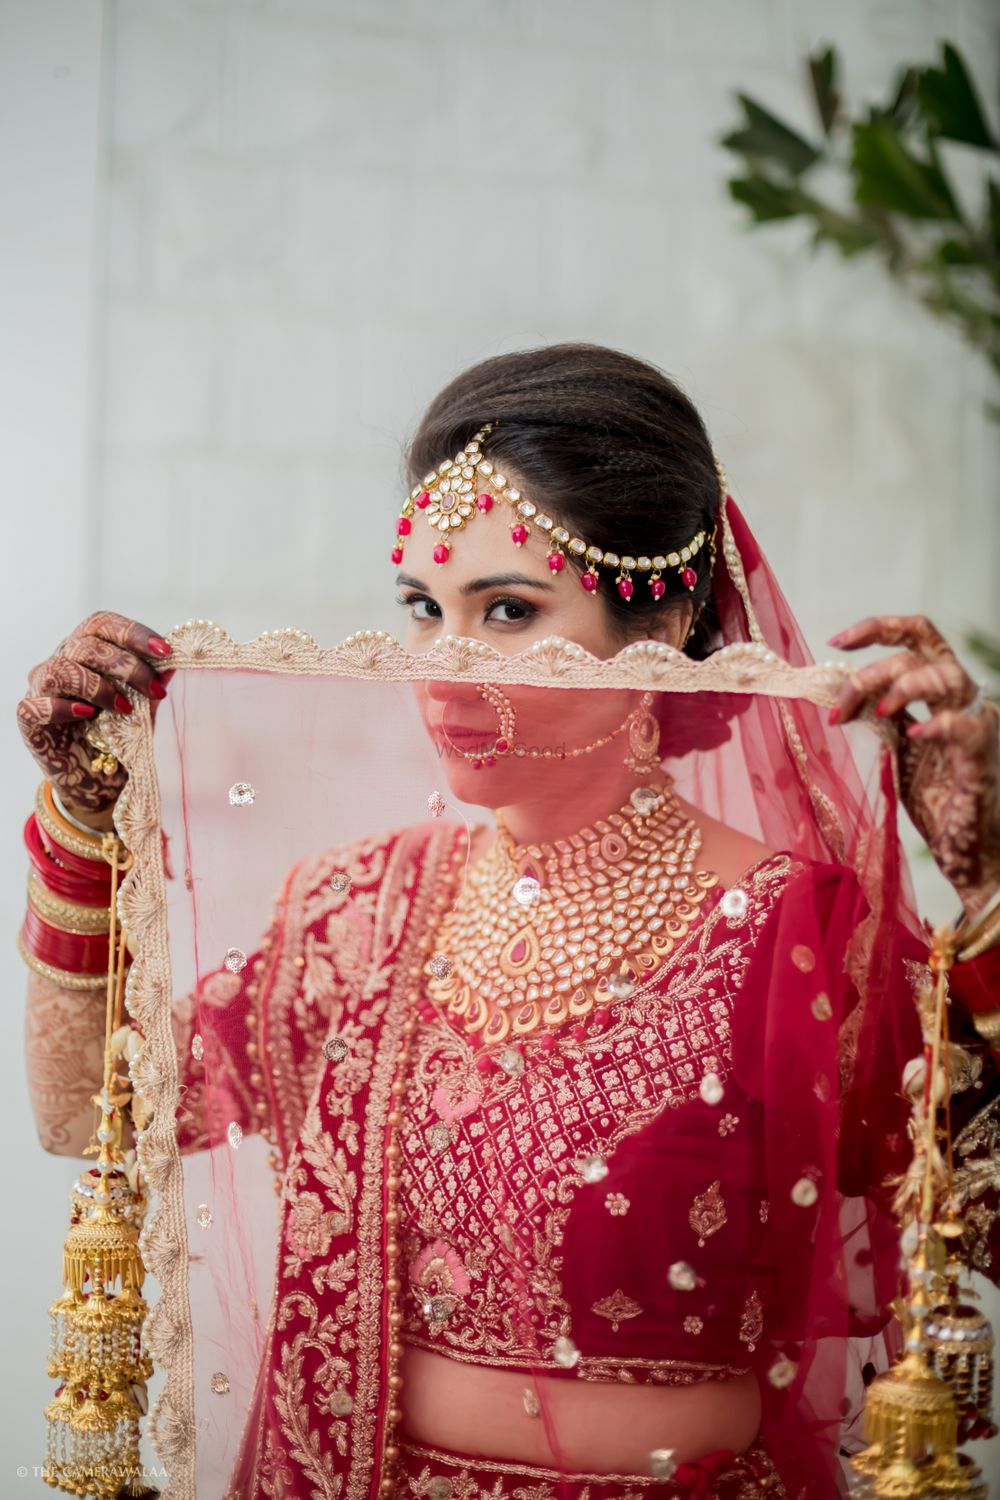 Photo From BRIDES - By The Camerawalaa by Paridhi Jain